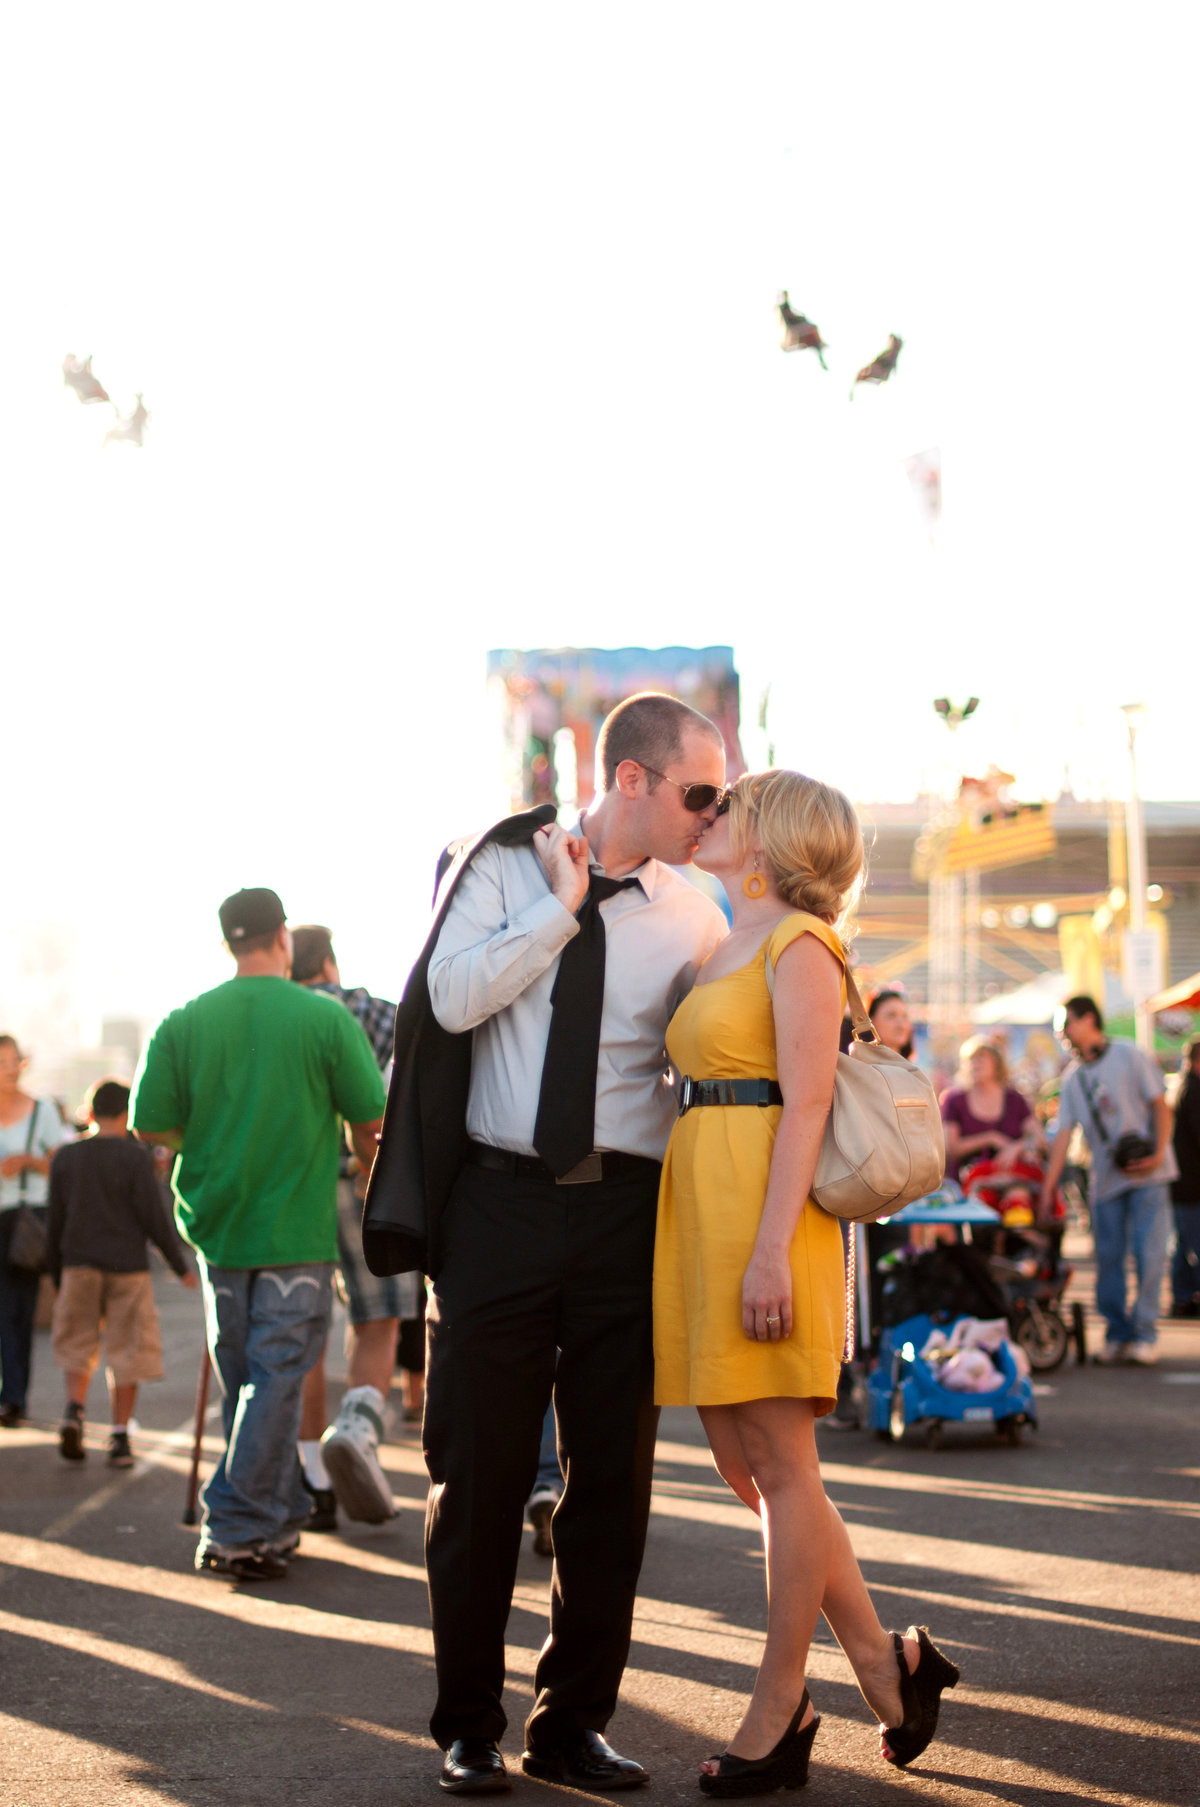 Old Hollywood style engagement photo at OC Fair, Orange County State fair engagement photo by Faria Munmun, Night engagement photo at Orange County State Fair in OC